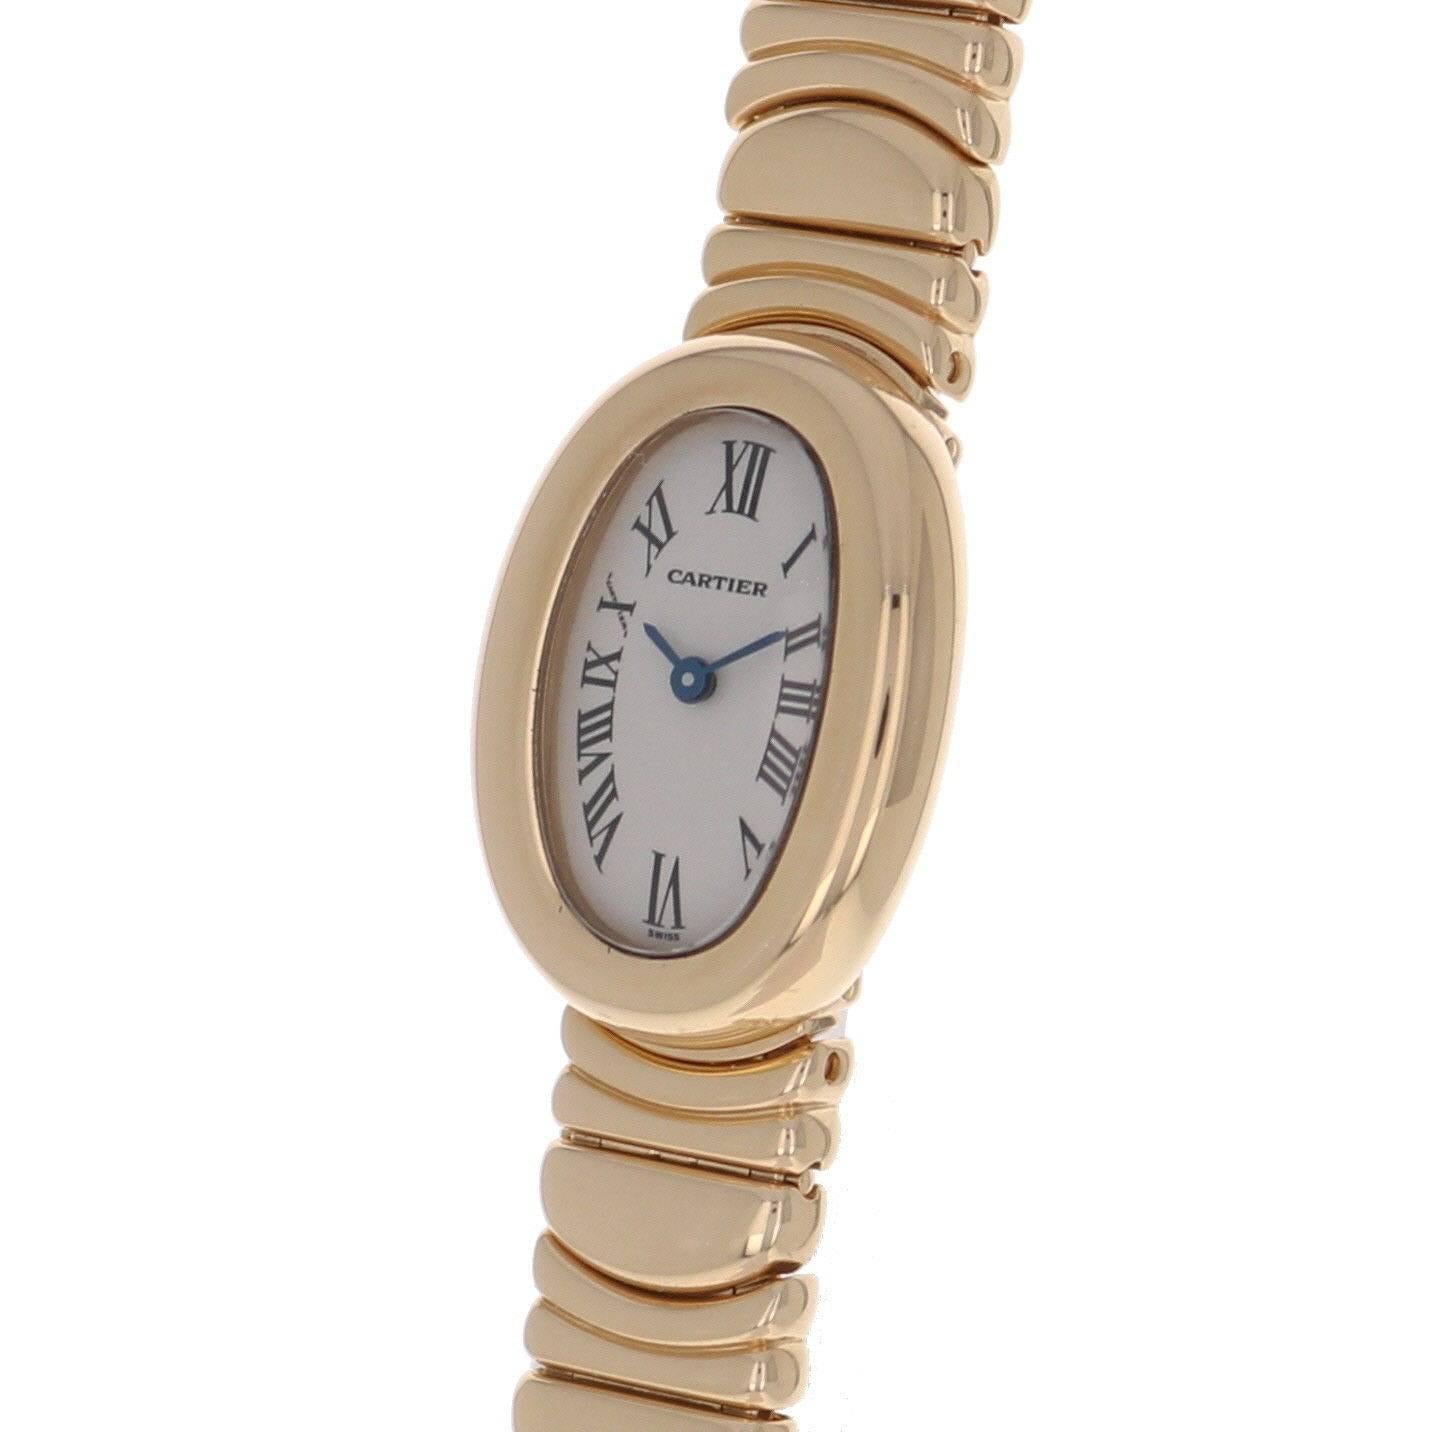 Brand Name  Cartier 
Style Number  W15109D8 
Also Called  2368 
Series  Mini Baignoire  
Gender  Ladies 
Case Material  18k Yellow Gold 
Dial Color  Silvered w/ Blued hands 
Movement  Quartz 
Engine  Cal. 058 
Functions  Hours, Minutes 
Crystal